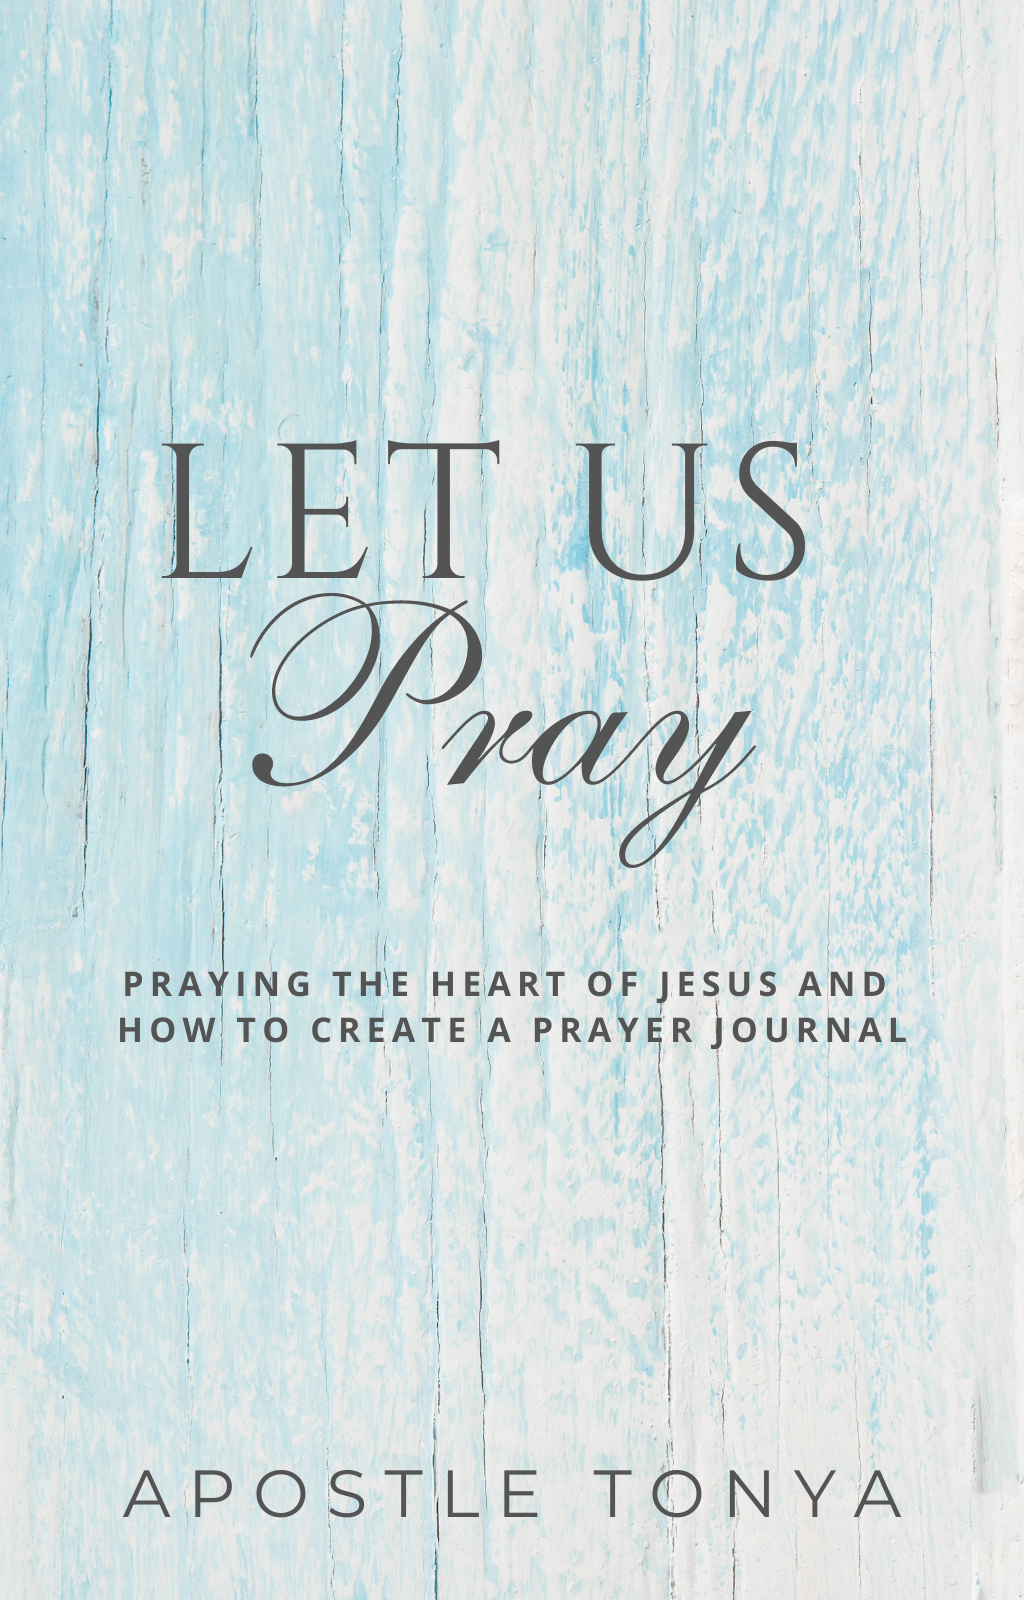 Let Us Pray: Praying the Heart of Jesus & How to Create a Prayer Journal (eBooklet)